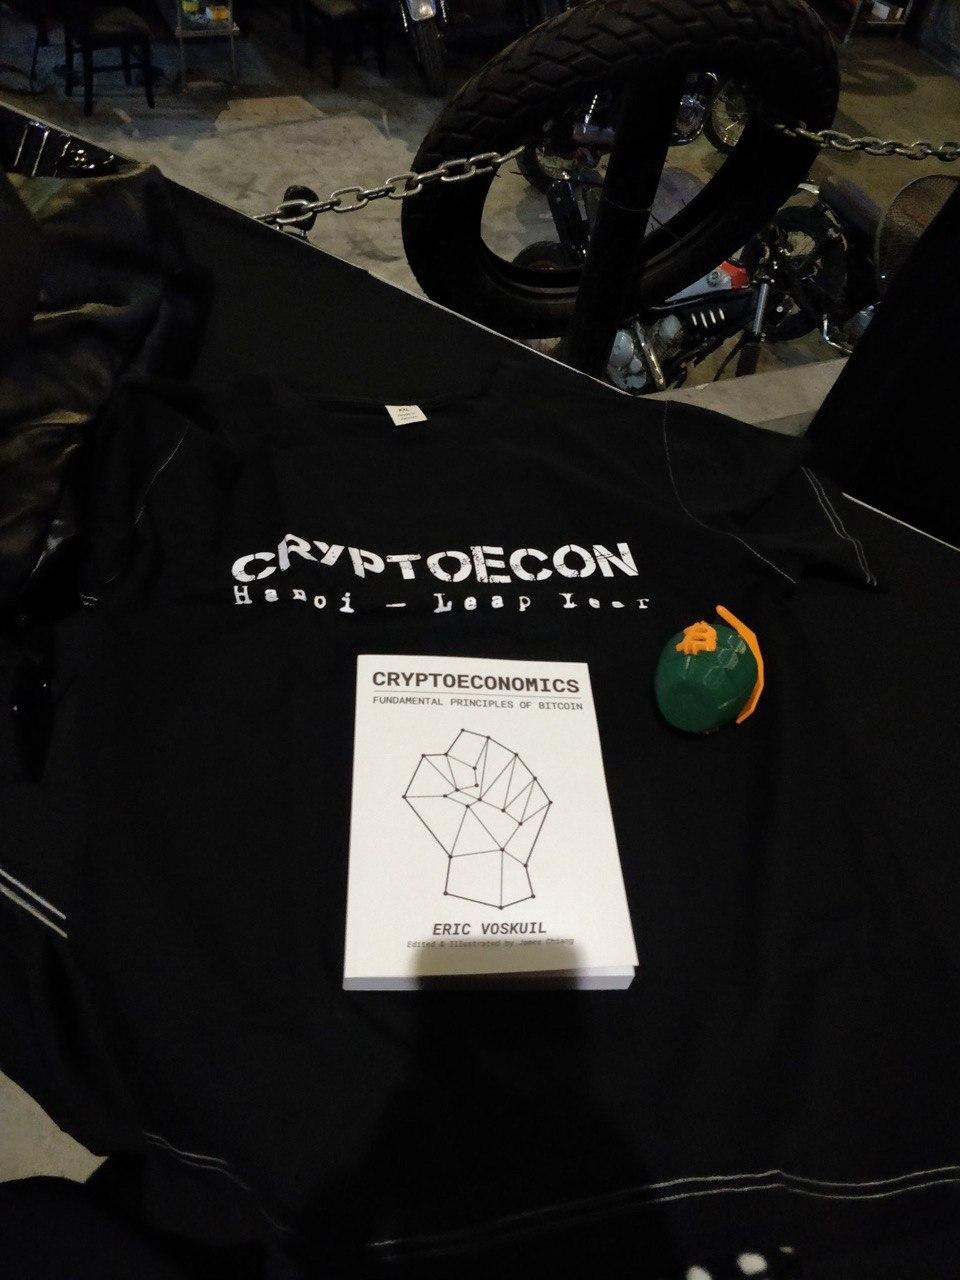 Missed out on CryptoEcon2020? Well - here’s your possibly last chance to get your hands on one of only 100 printed books of “Cryptoeconomics” (Photocredit: SimoMace